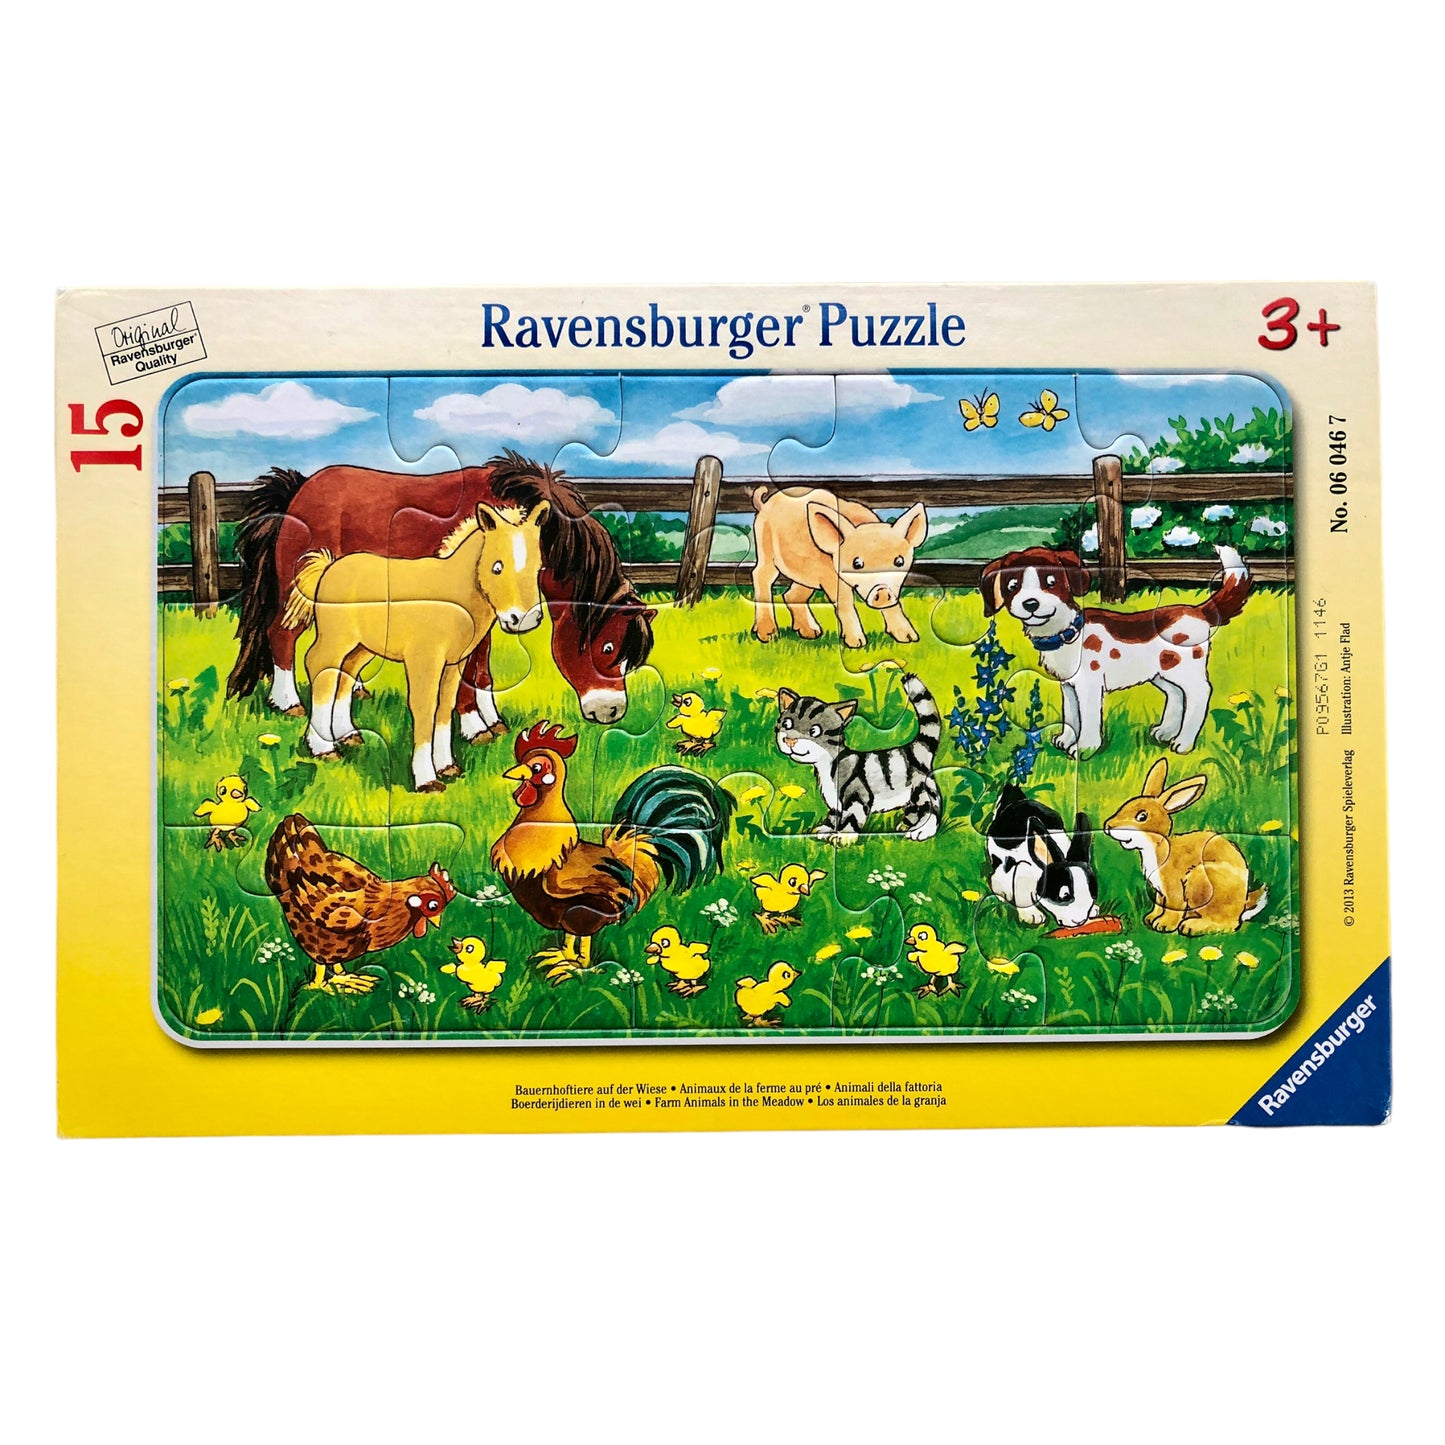 Ravensburger Puzzle - Farm Animals in the Meadow - 15 pieces